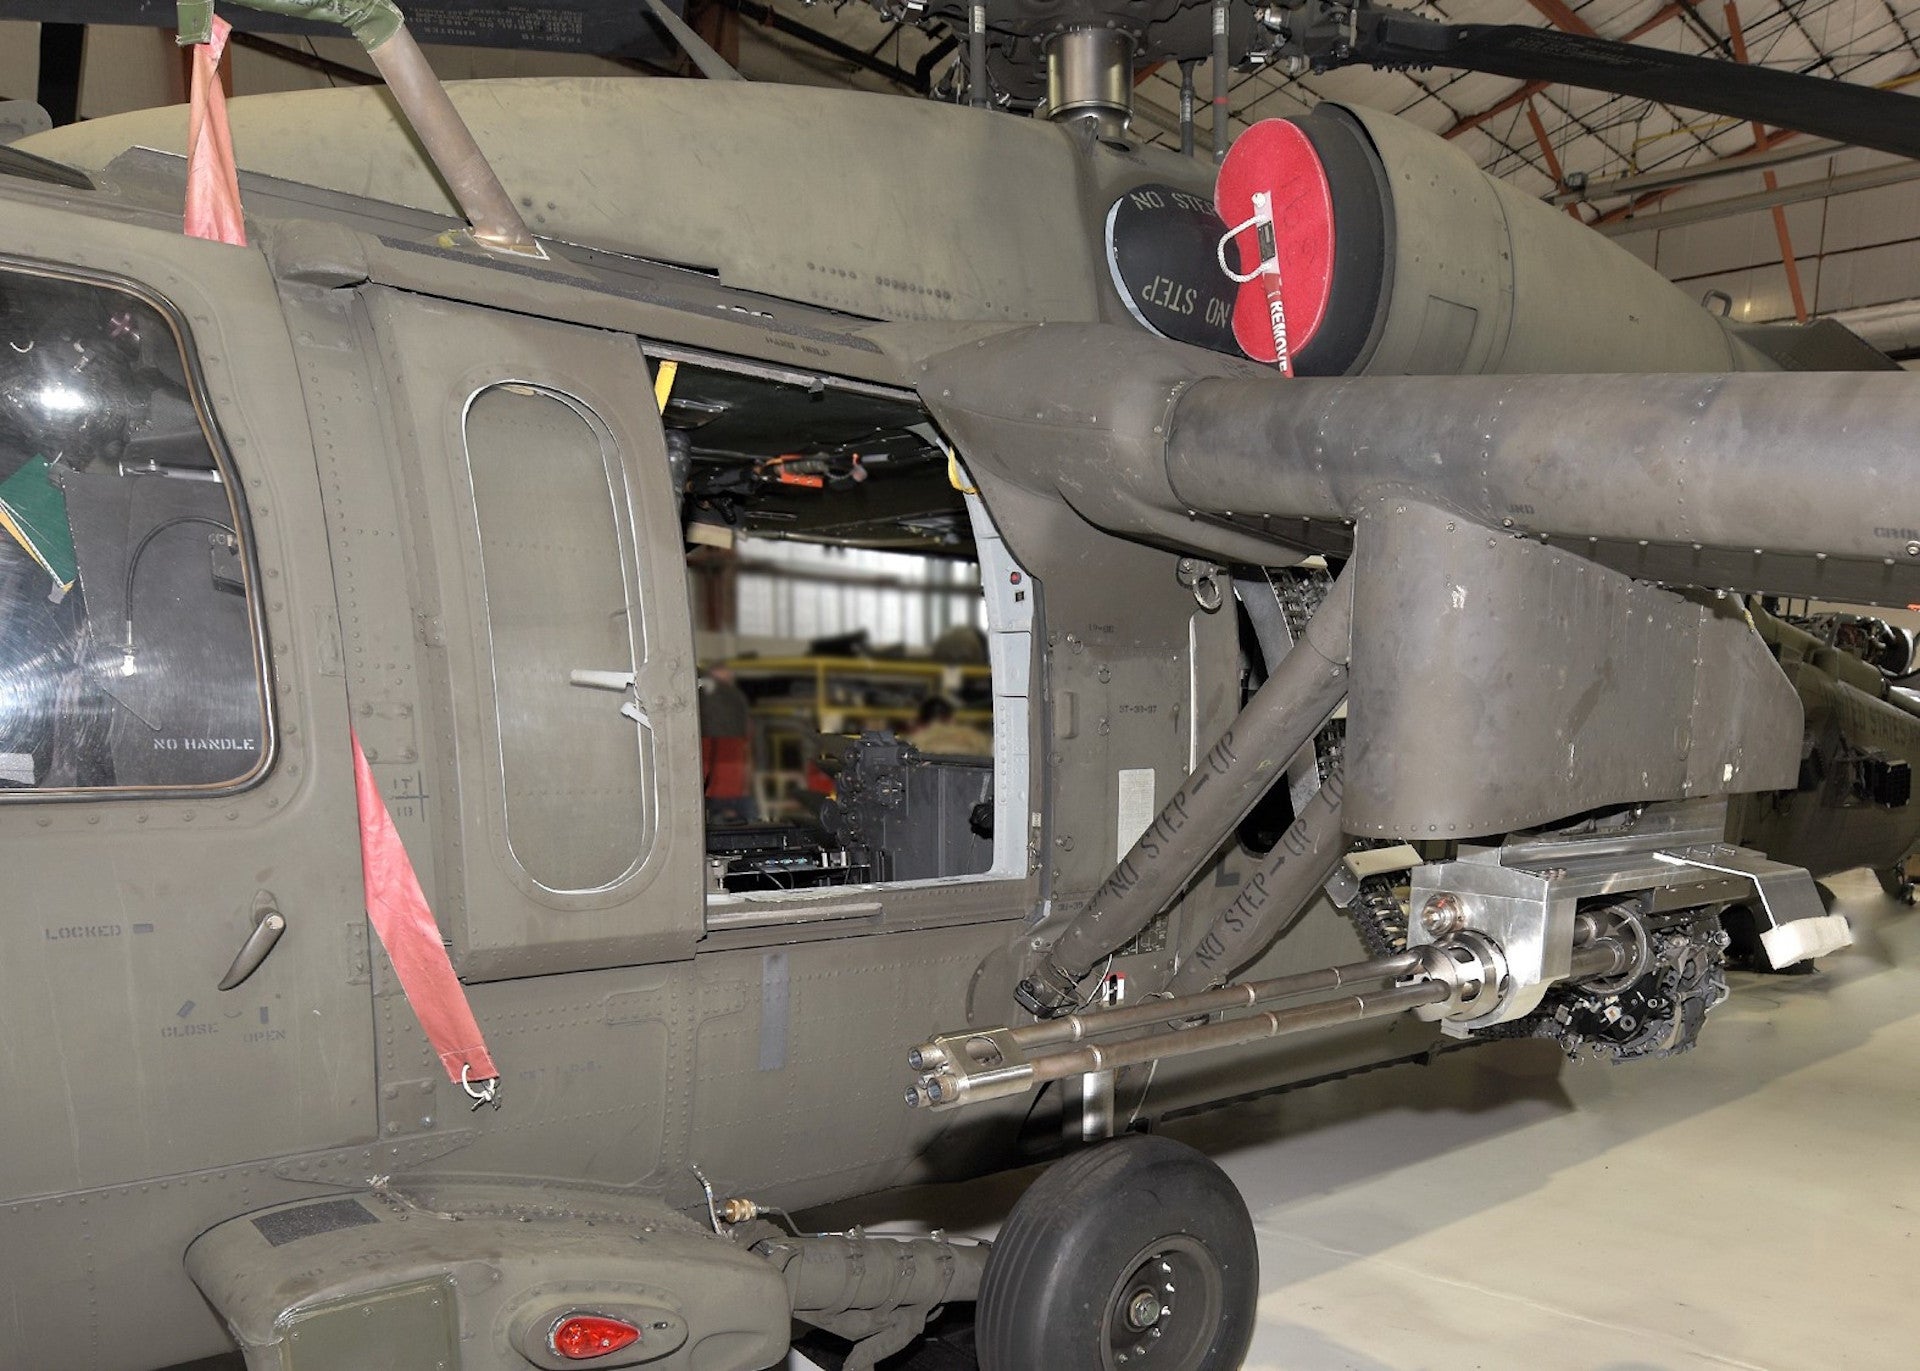 This Is Our First Look At The Army's New 20Mm Aerial Cannon On An Actual  Helicopter